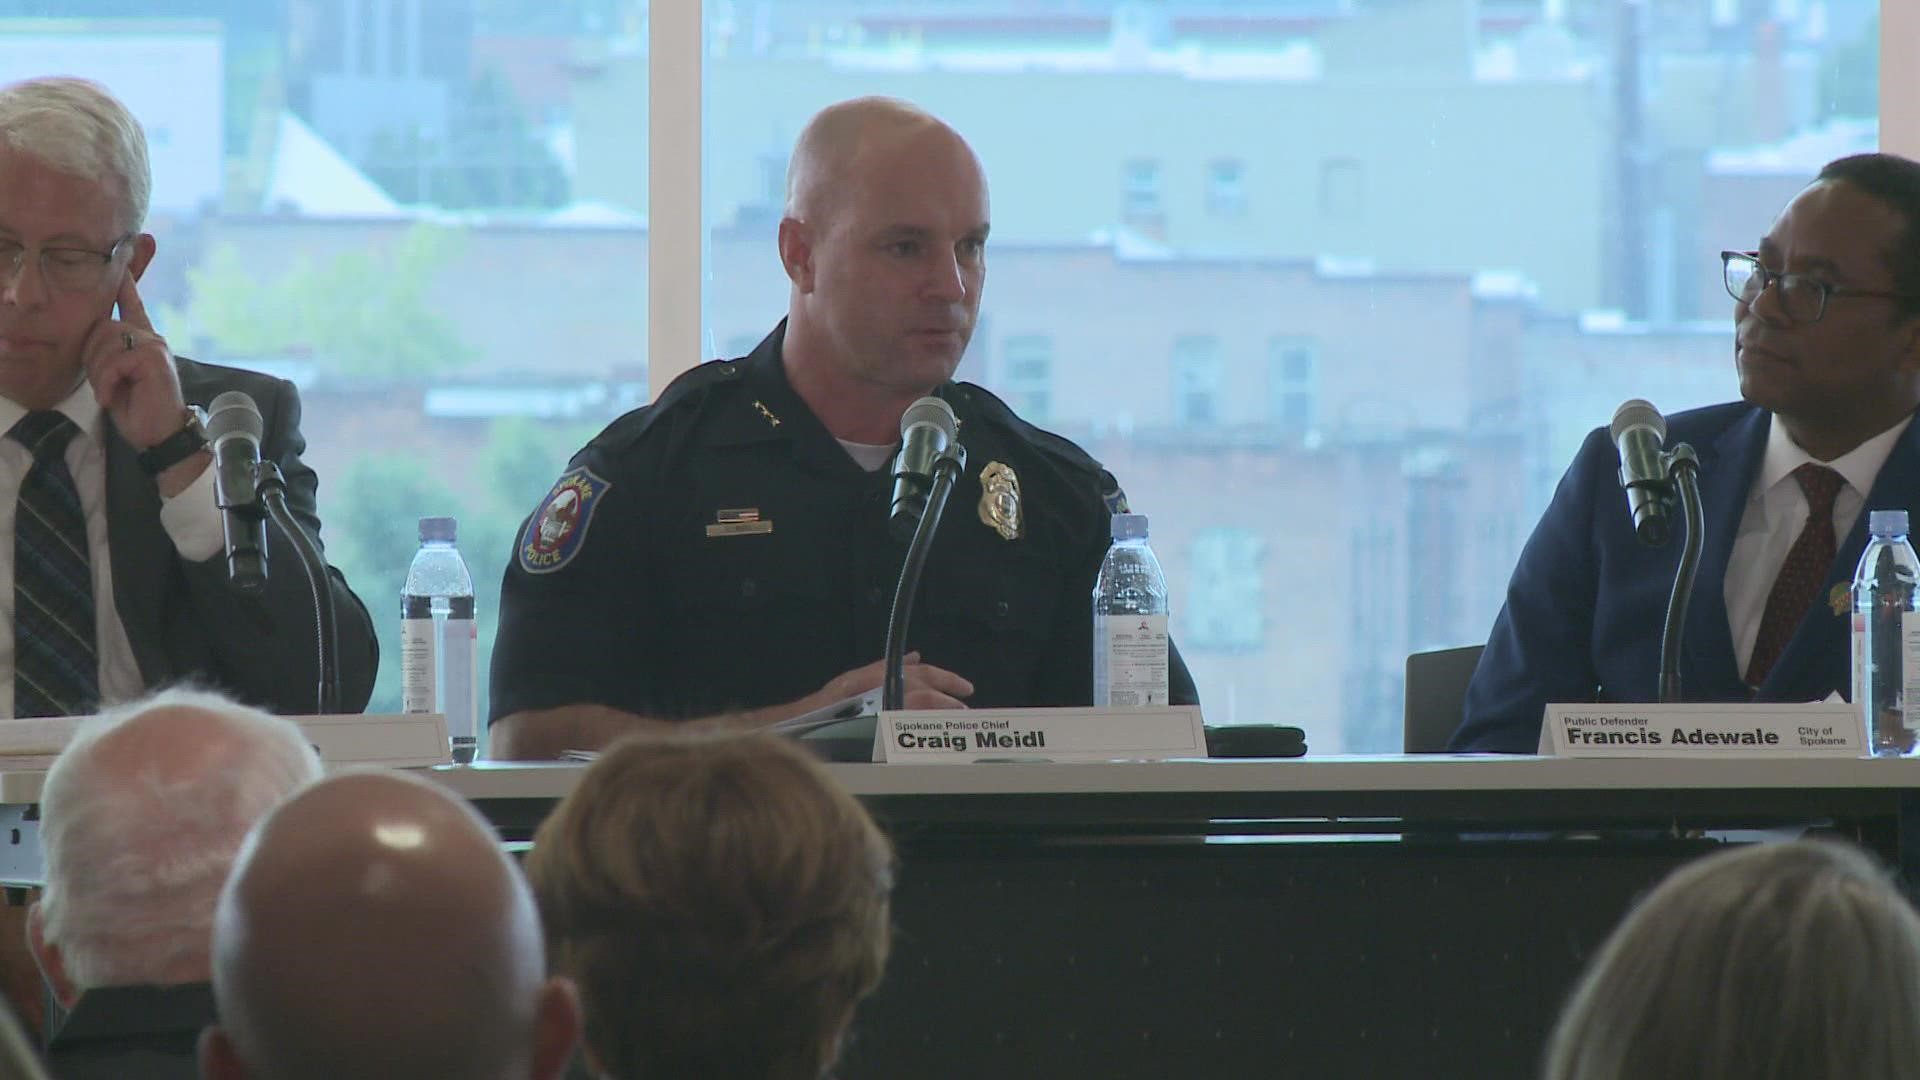 Spokane Police Chief Craig Meidl says there needs to be some incentive for people to get clean and off drugs.